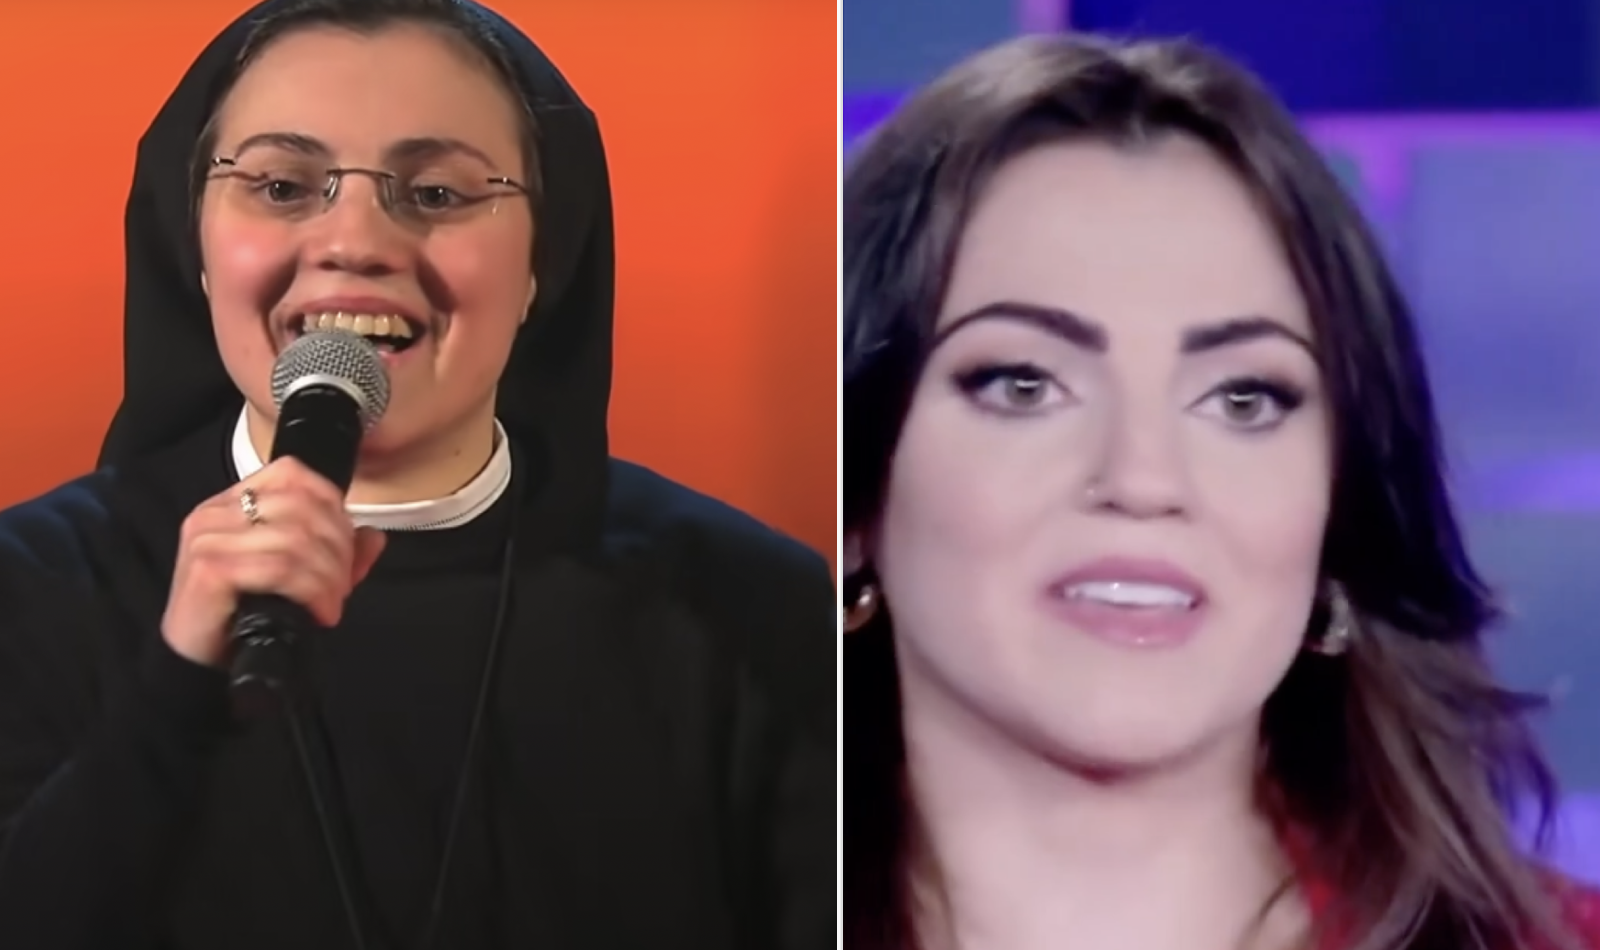 The photo showing before and after Sister Cristina